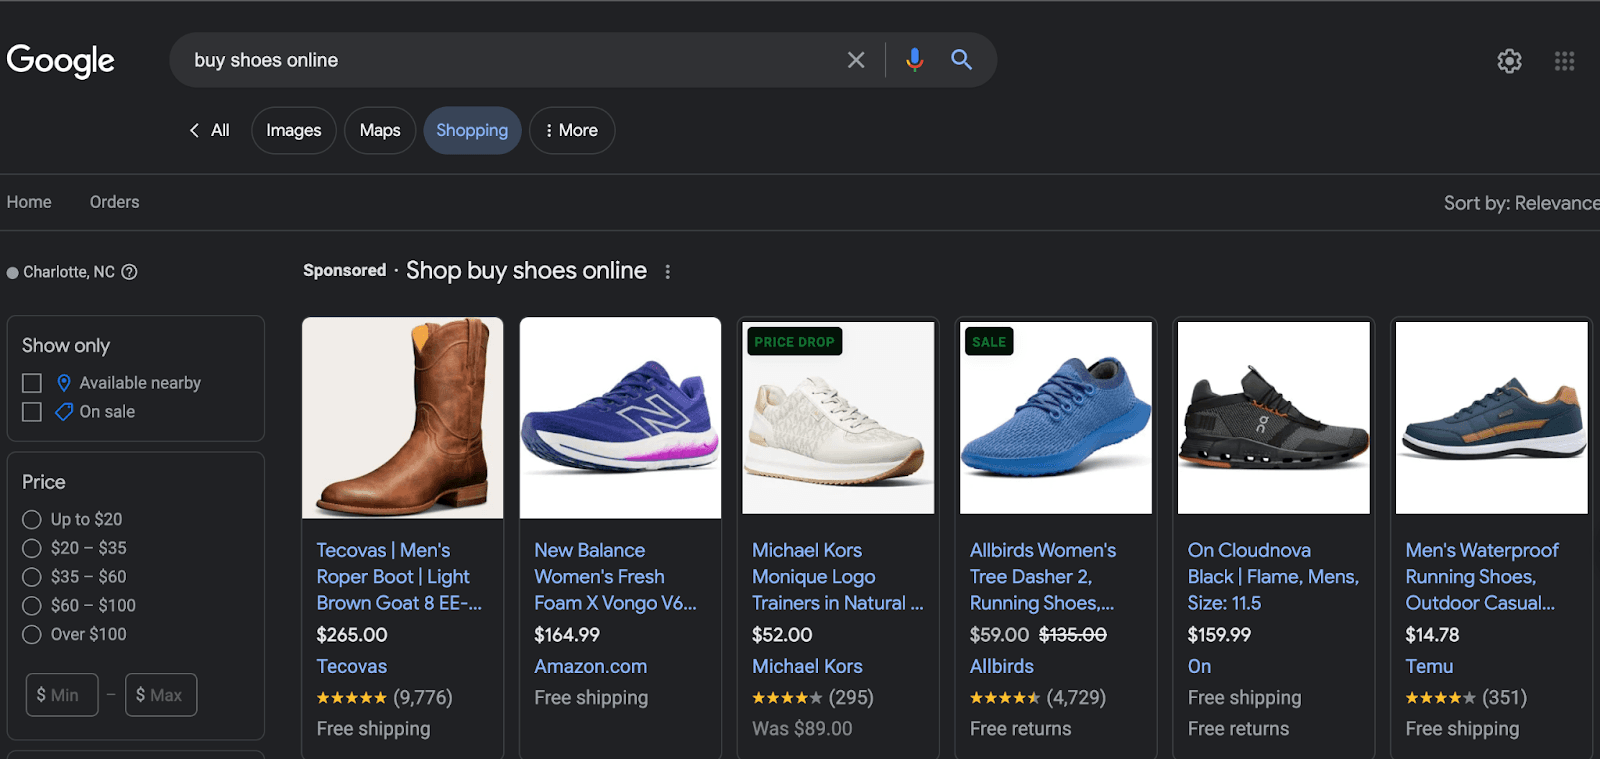 PPC ad search result for 'buy shoes online'